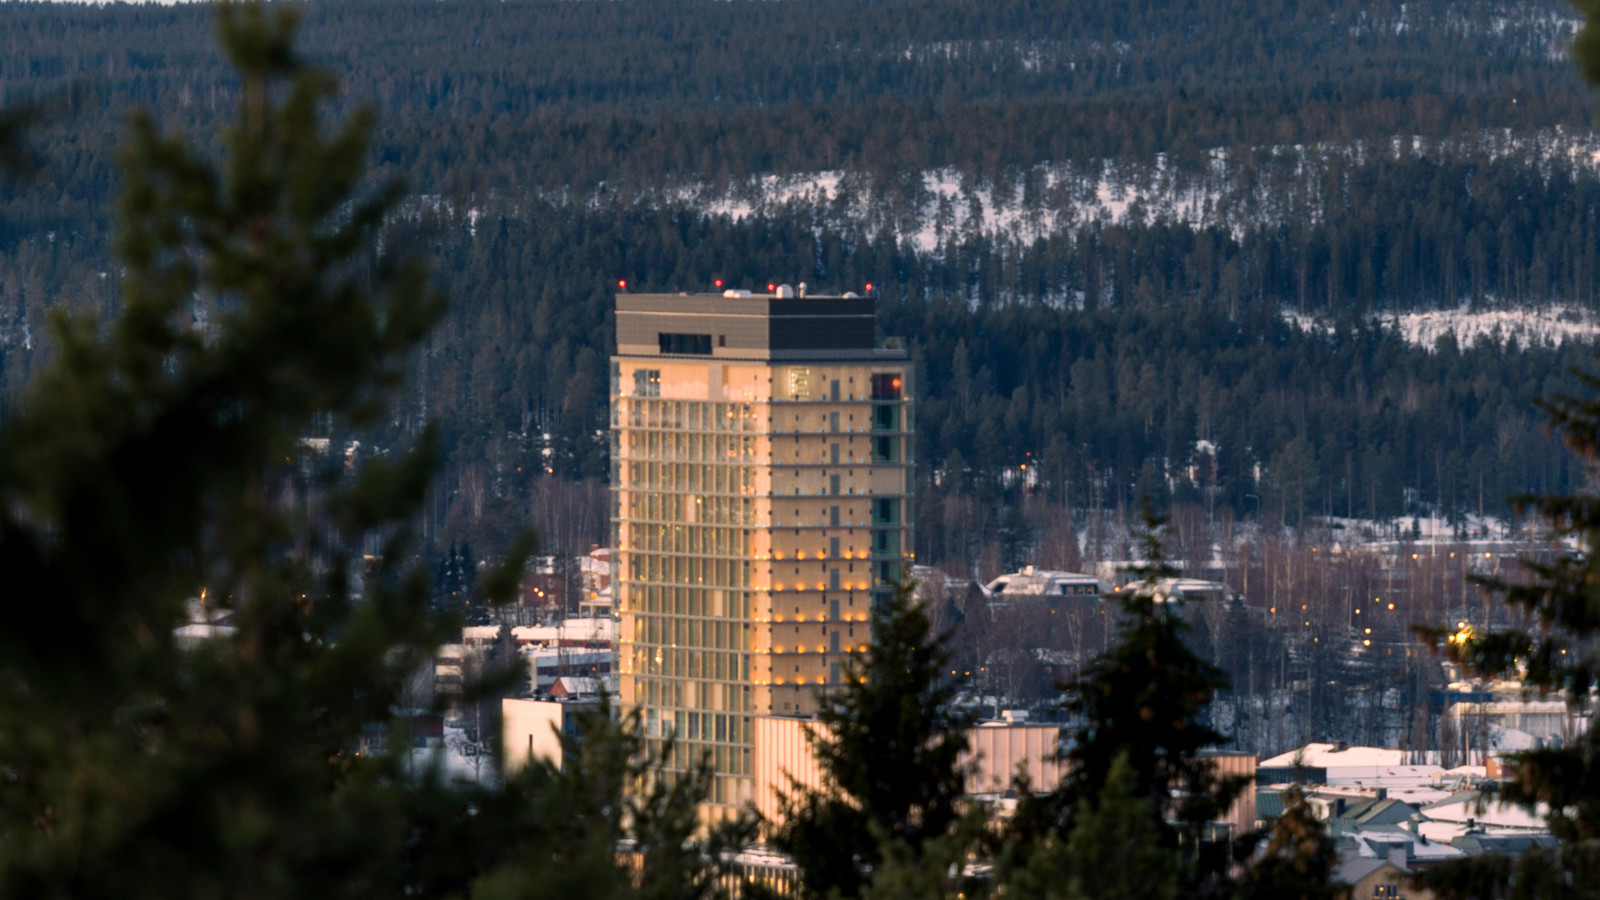 Treetops in the foreground, The Wood Hotel by Elite and wintry forest in the background